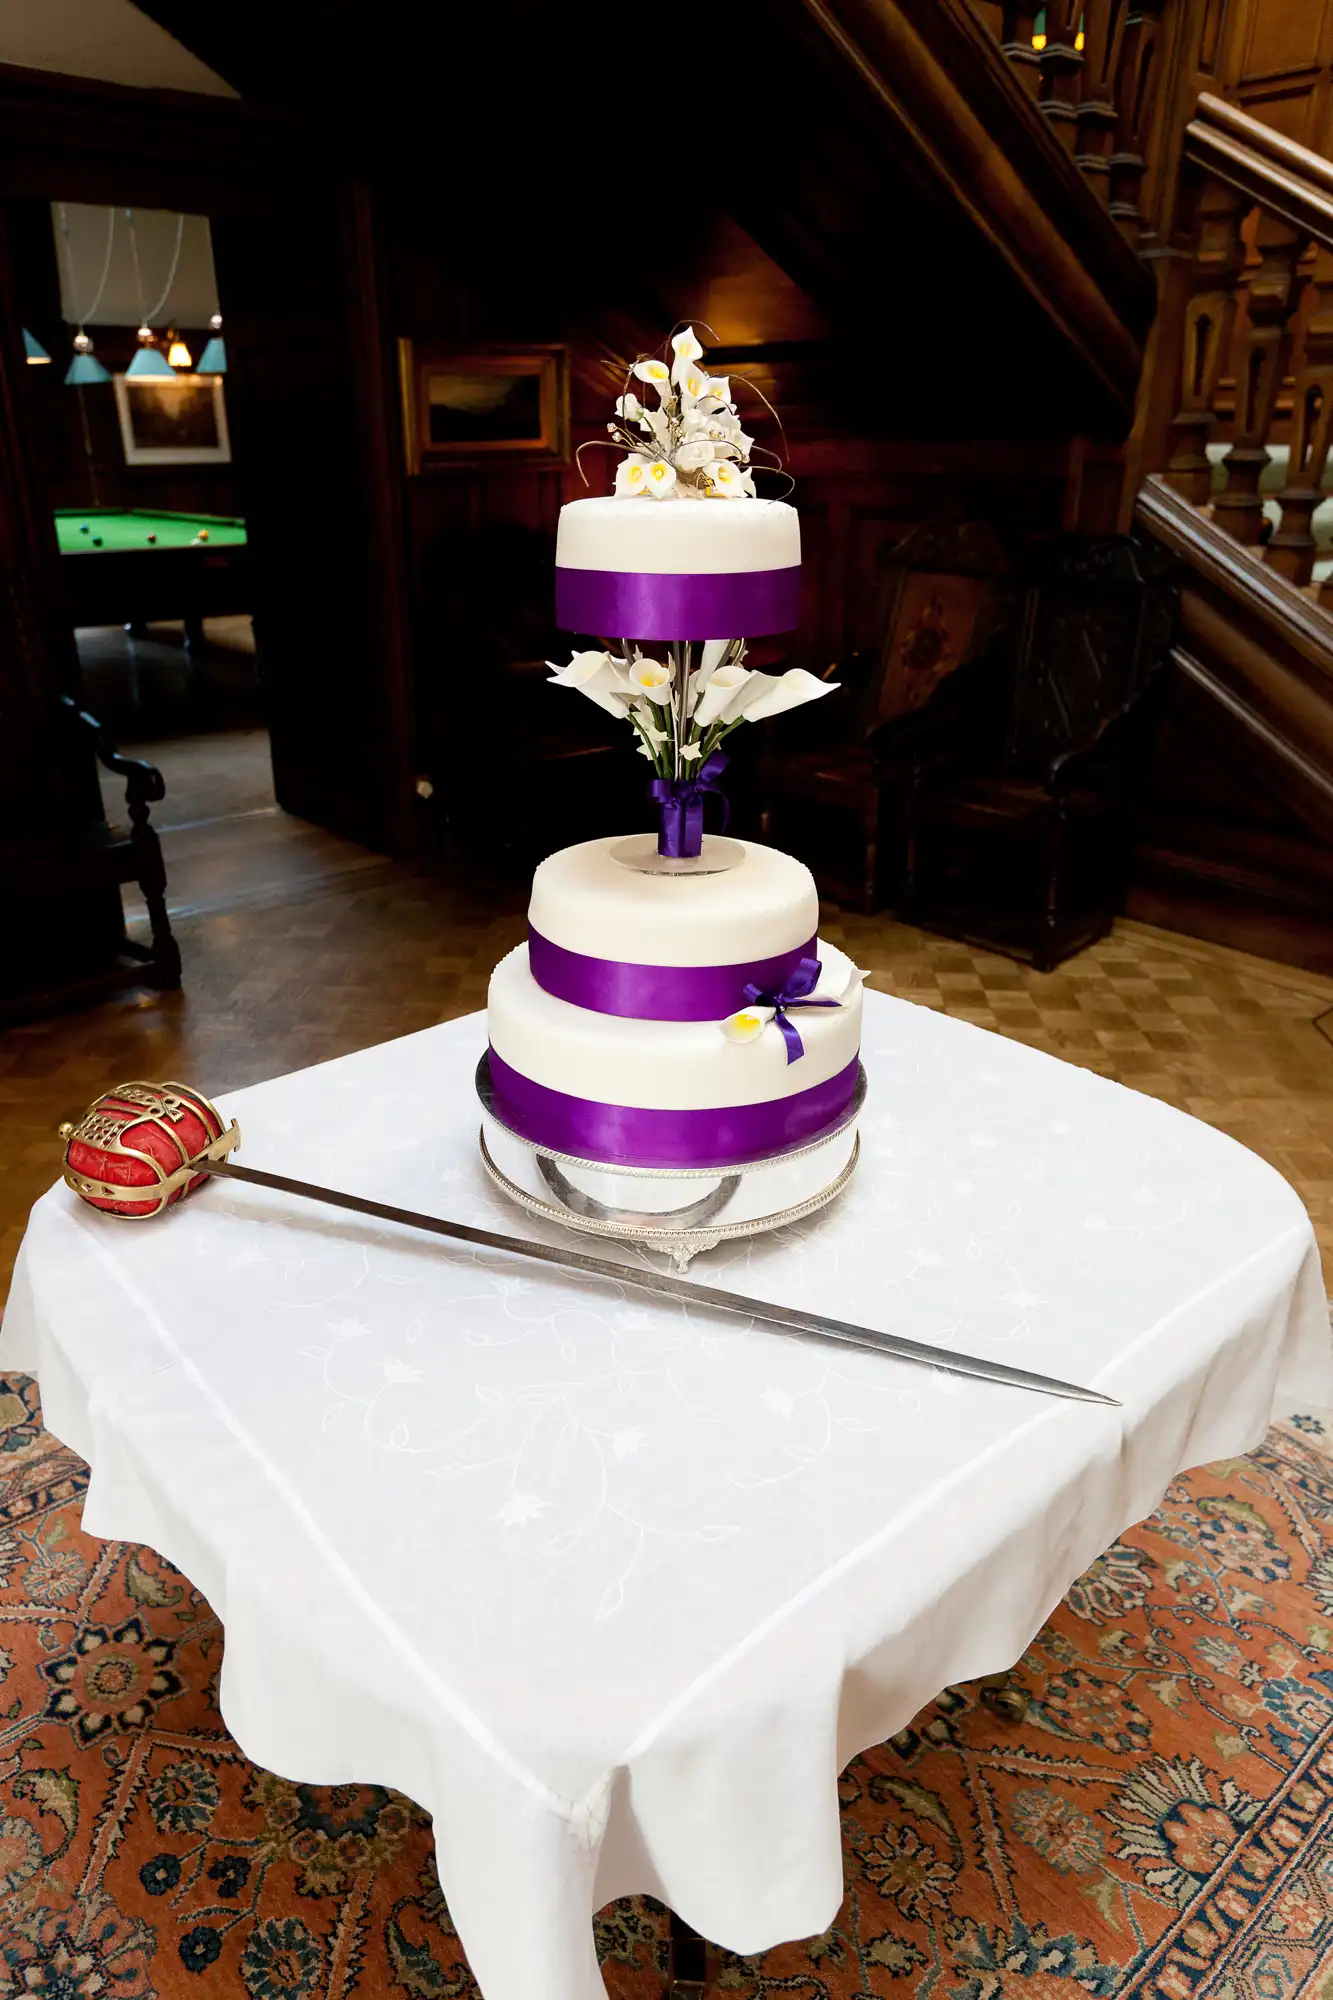 A three-tiered wedding cake with purple ribbons, decorated with white and purple flowers, displayed on a table in an elegant room with a wood staircase.